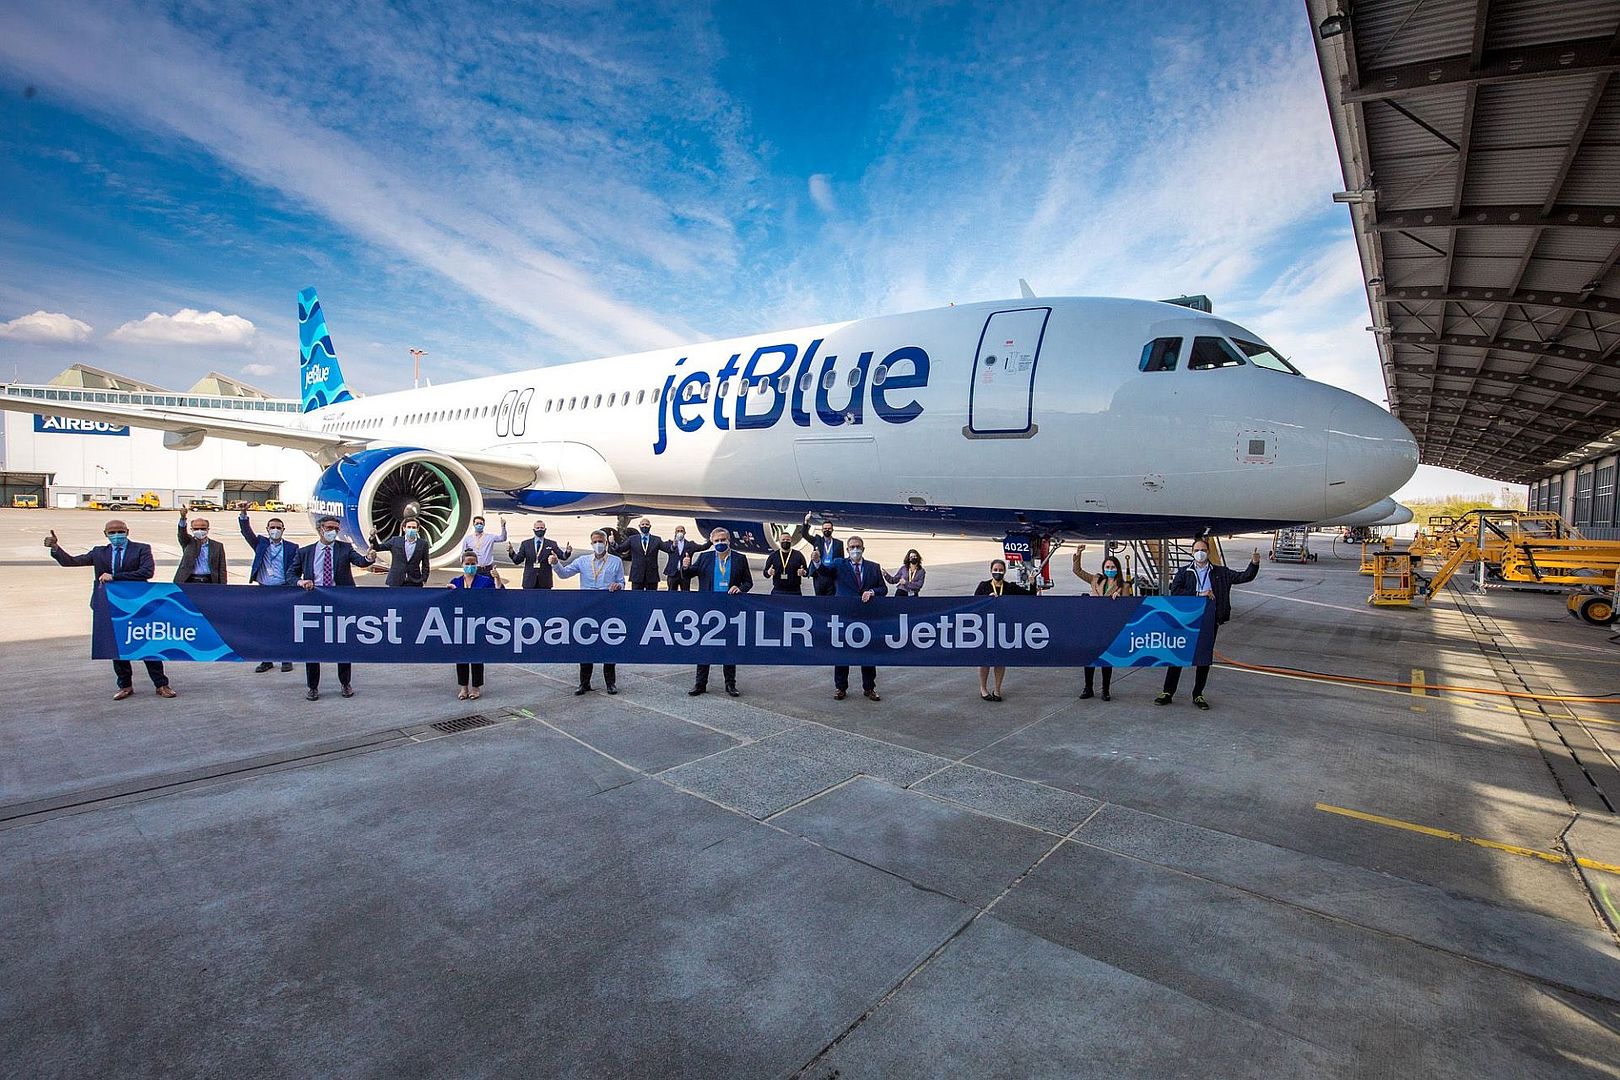 First Airspace A321LR To Jetblue